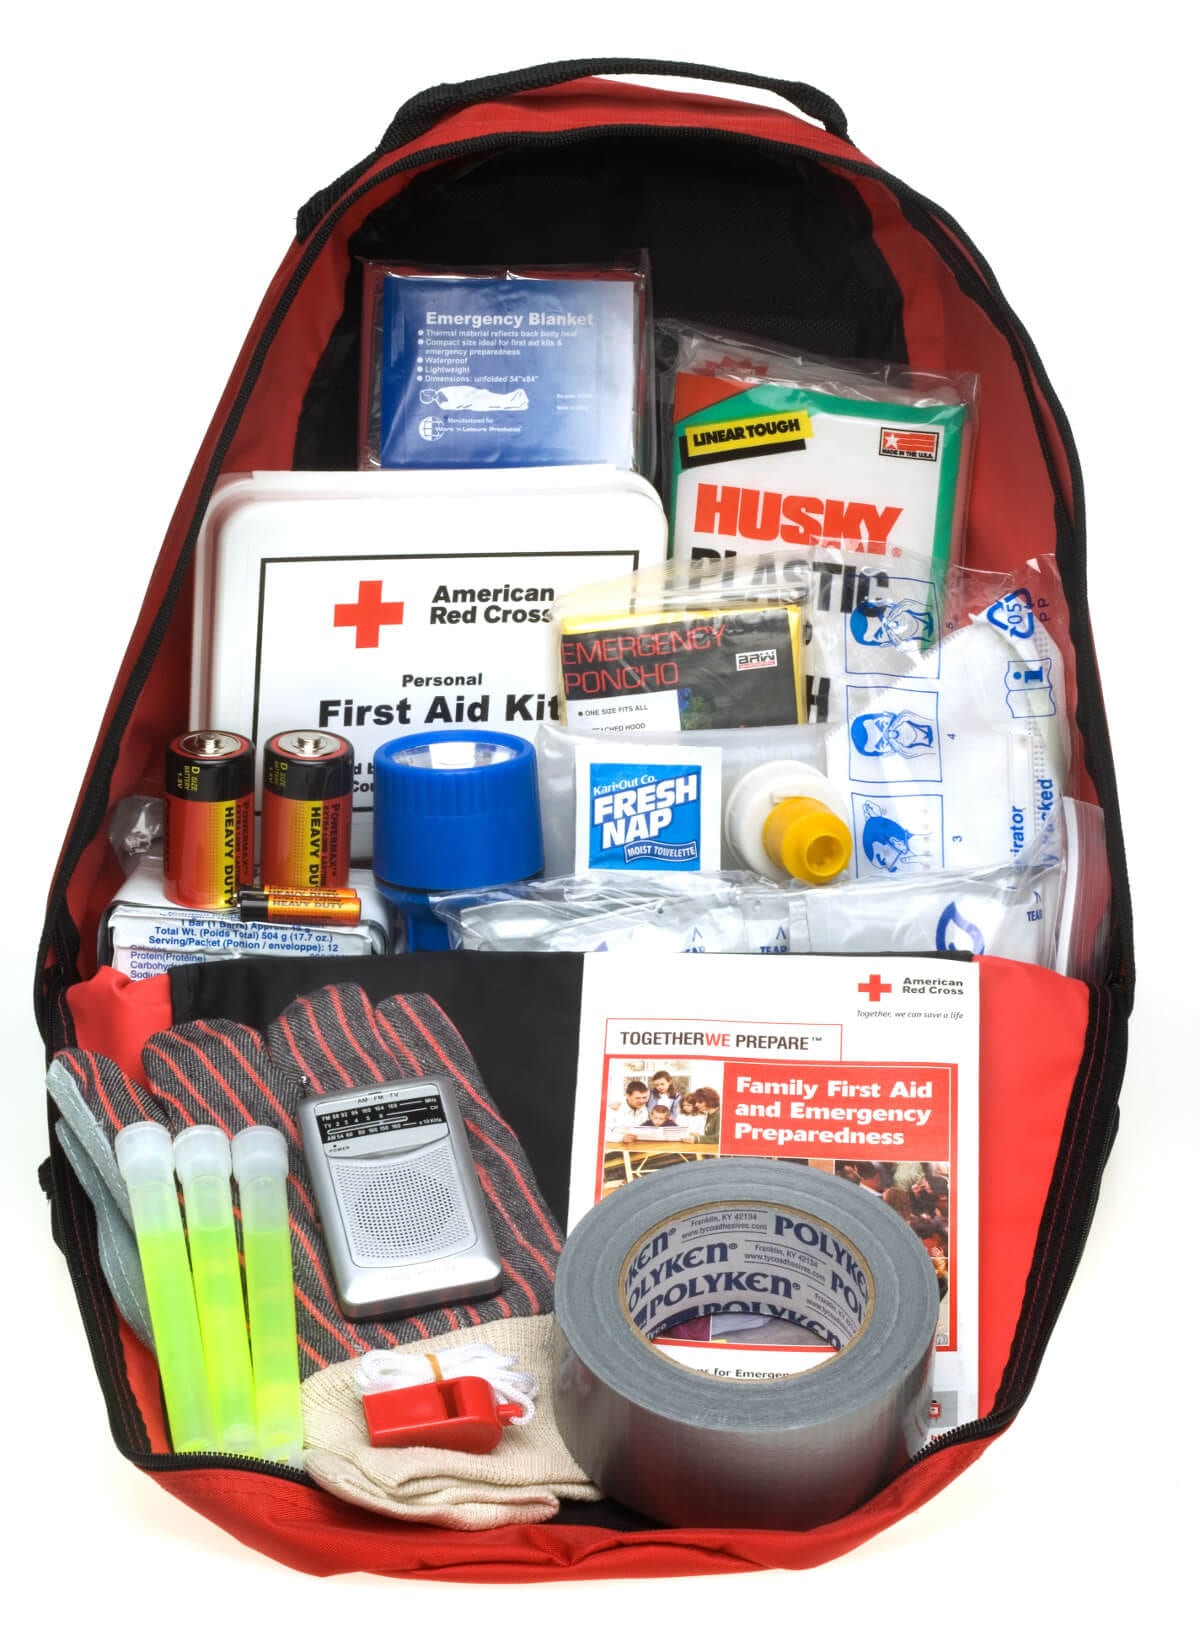 How to Put Together a Travel Emergency Kit - London Drugs Blog